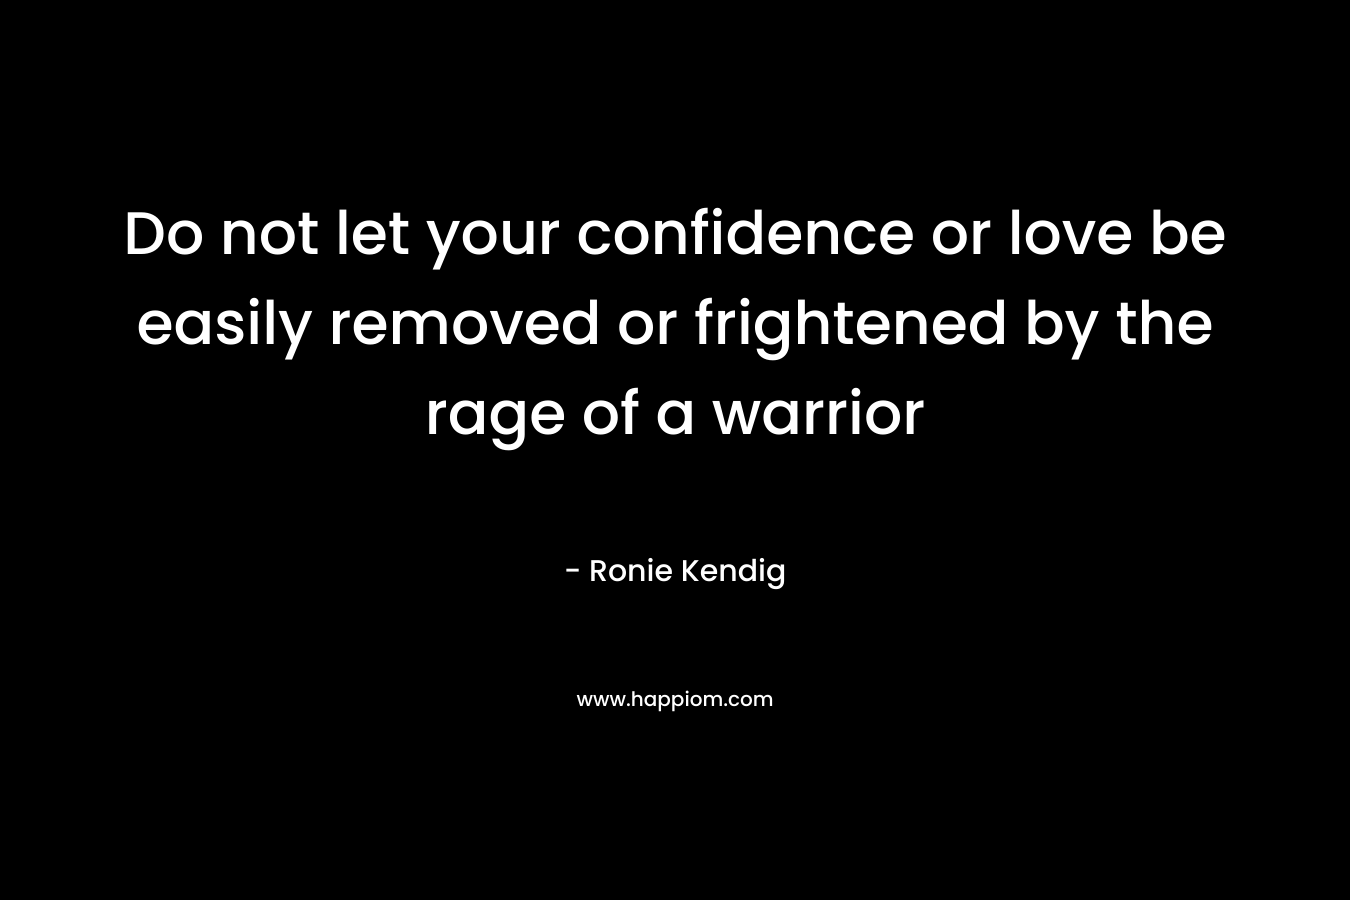 Do not let your confidence or love be easily removed or frightened by the rage of a warrior